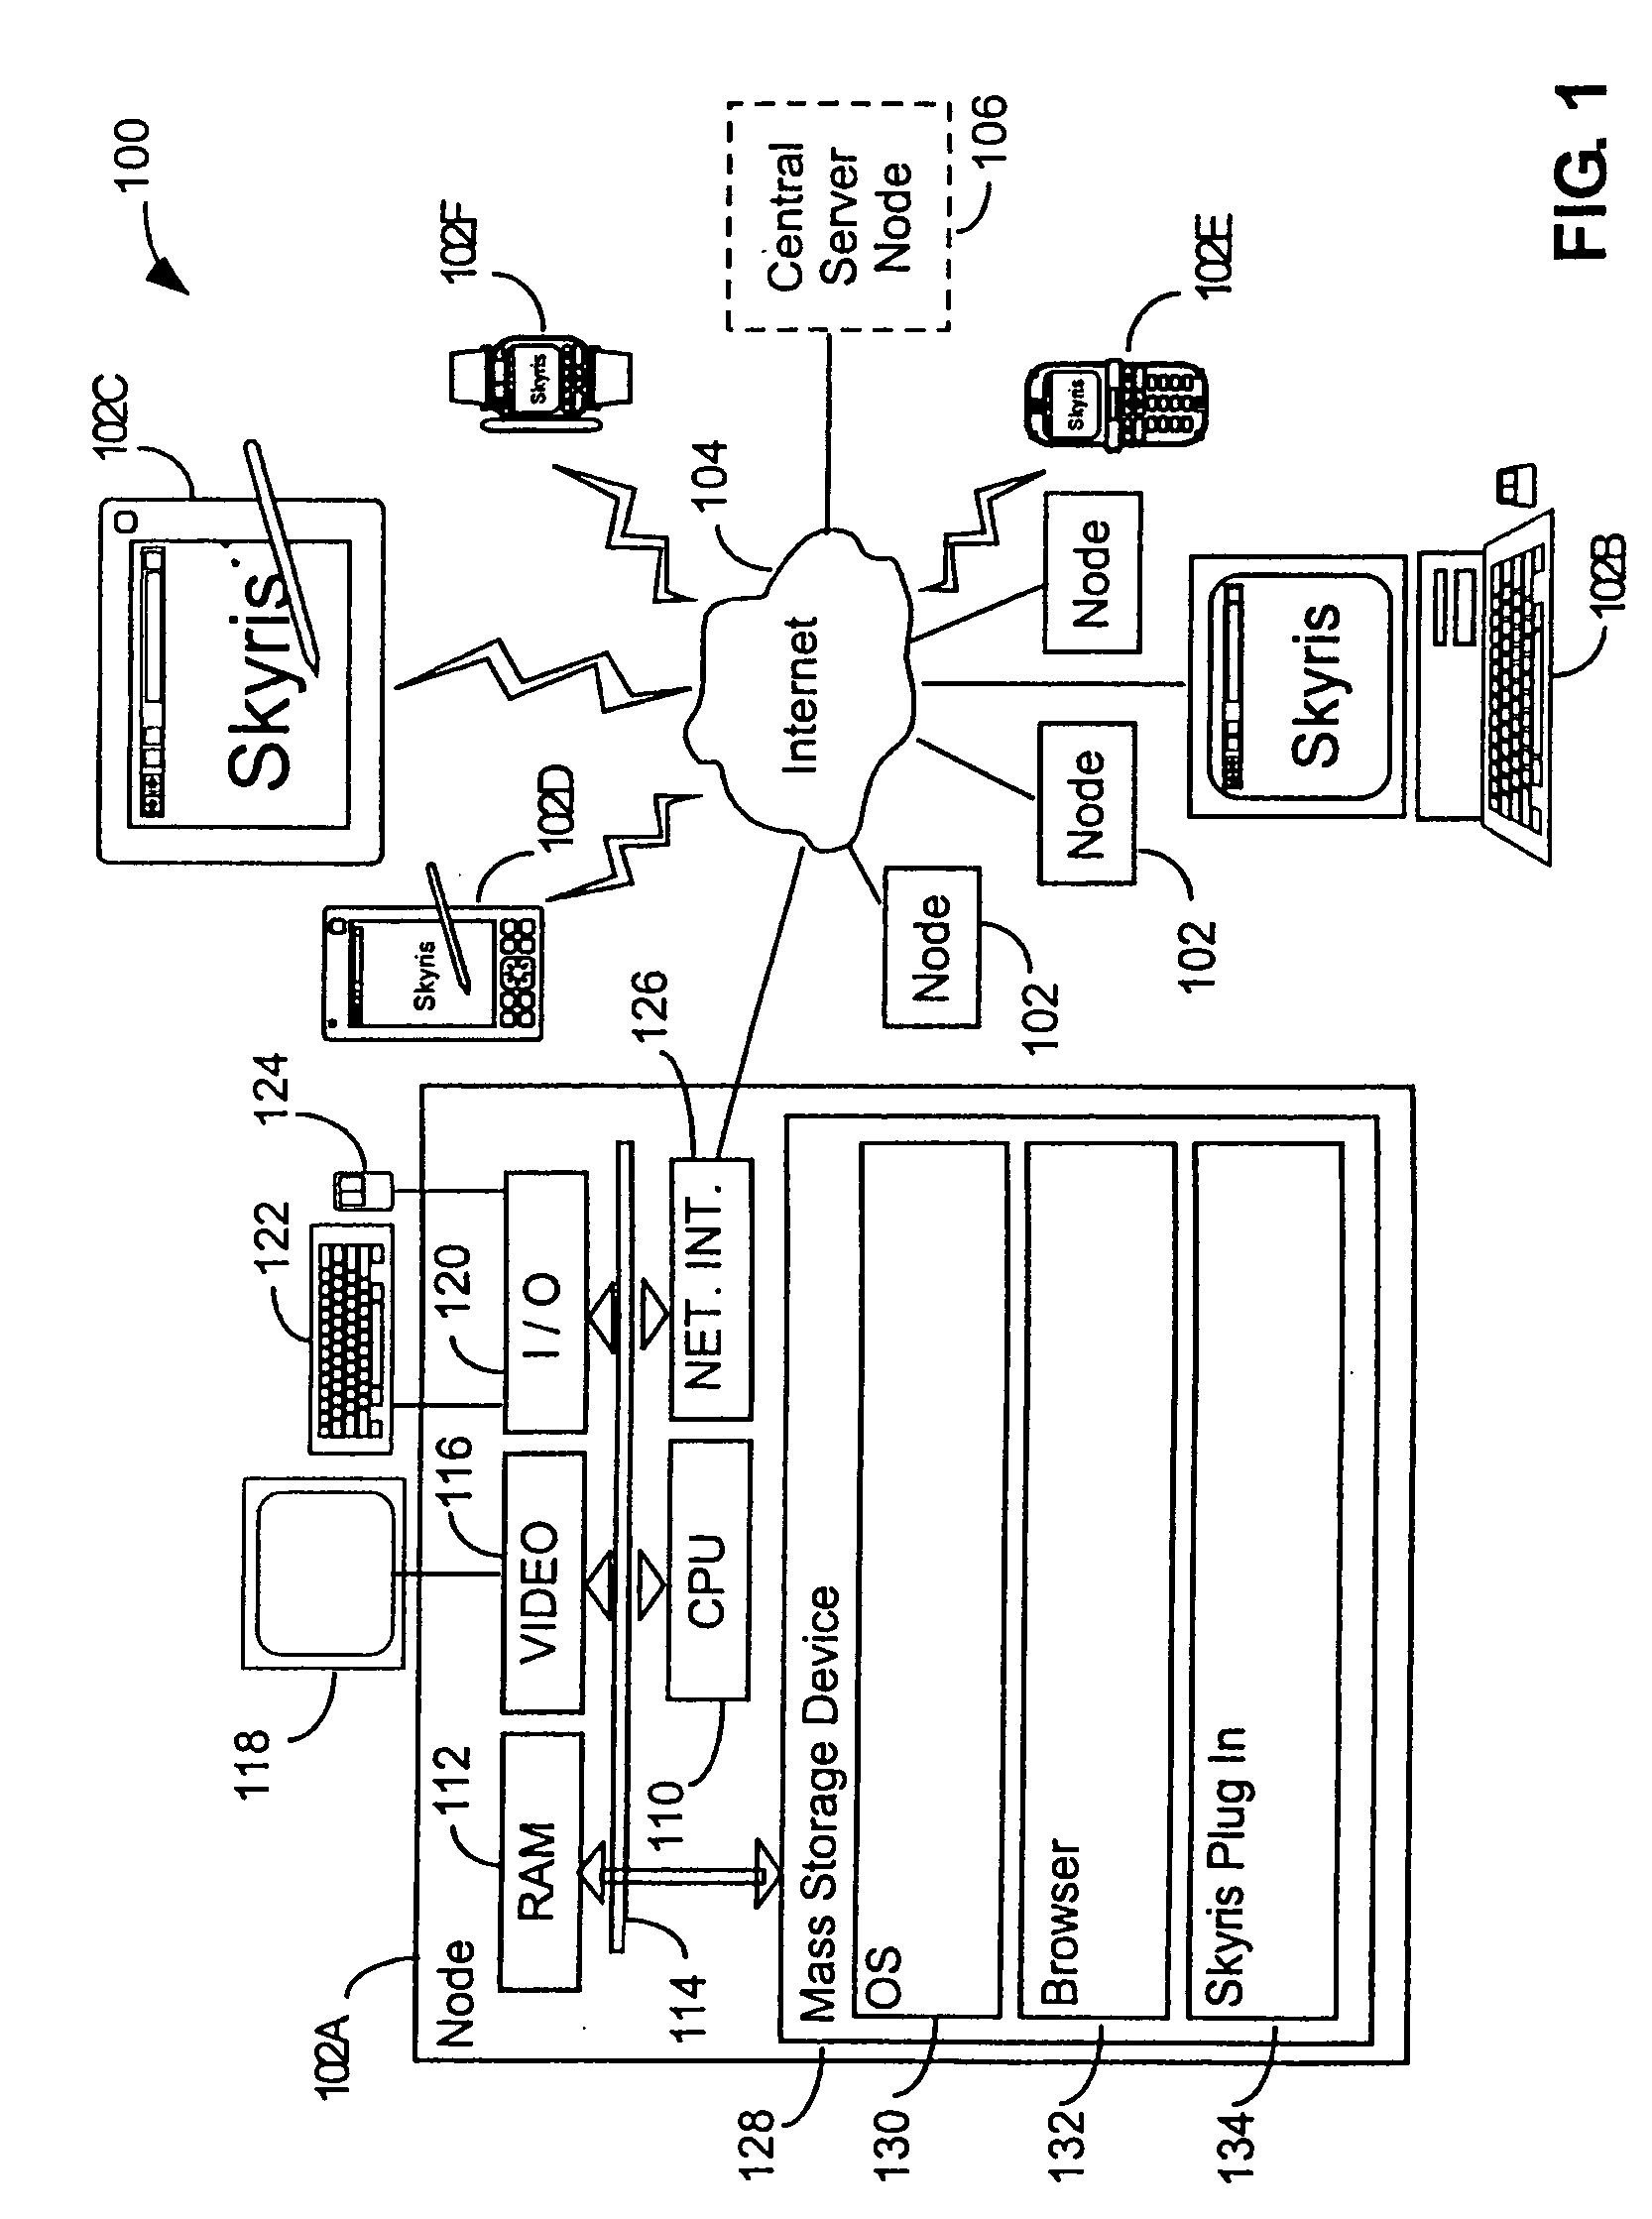 Systems, methods and programming for routing and indexing globally addressable objects and associated business models